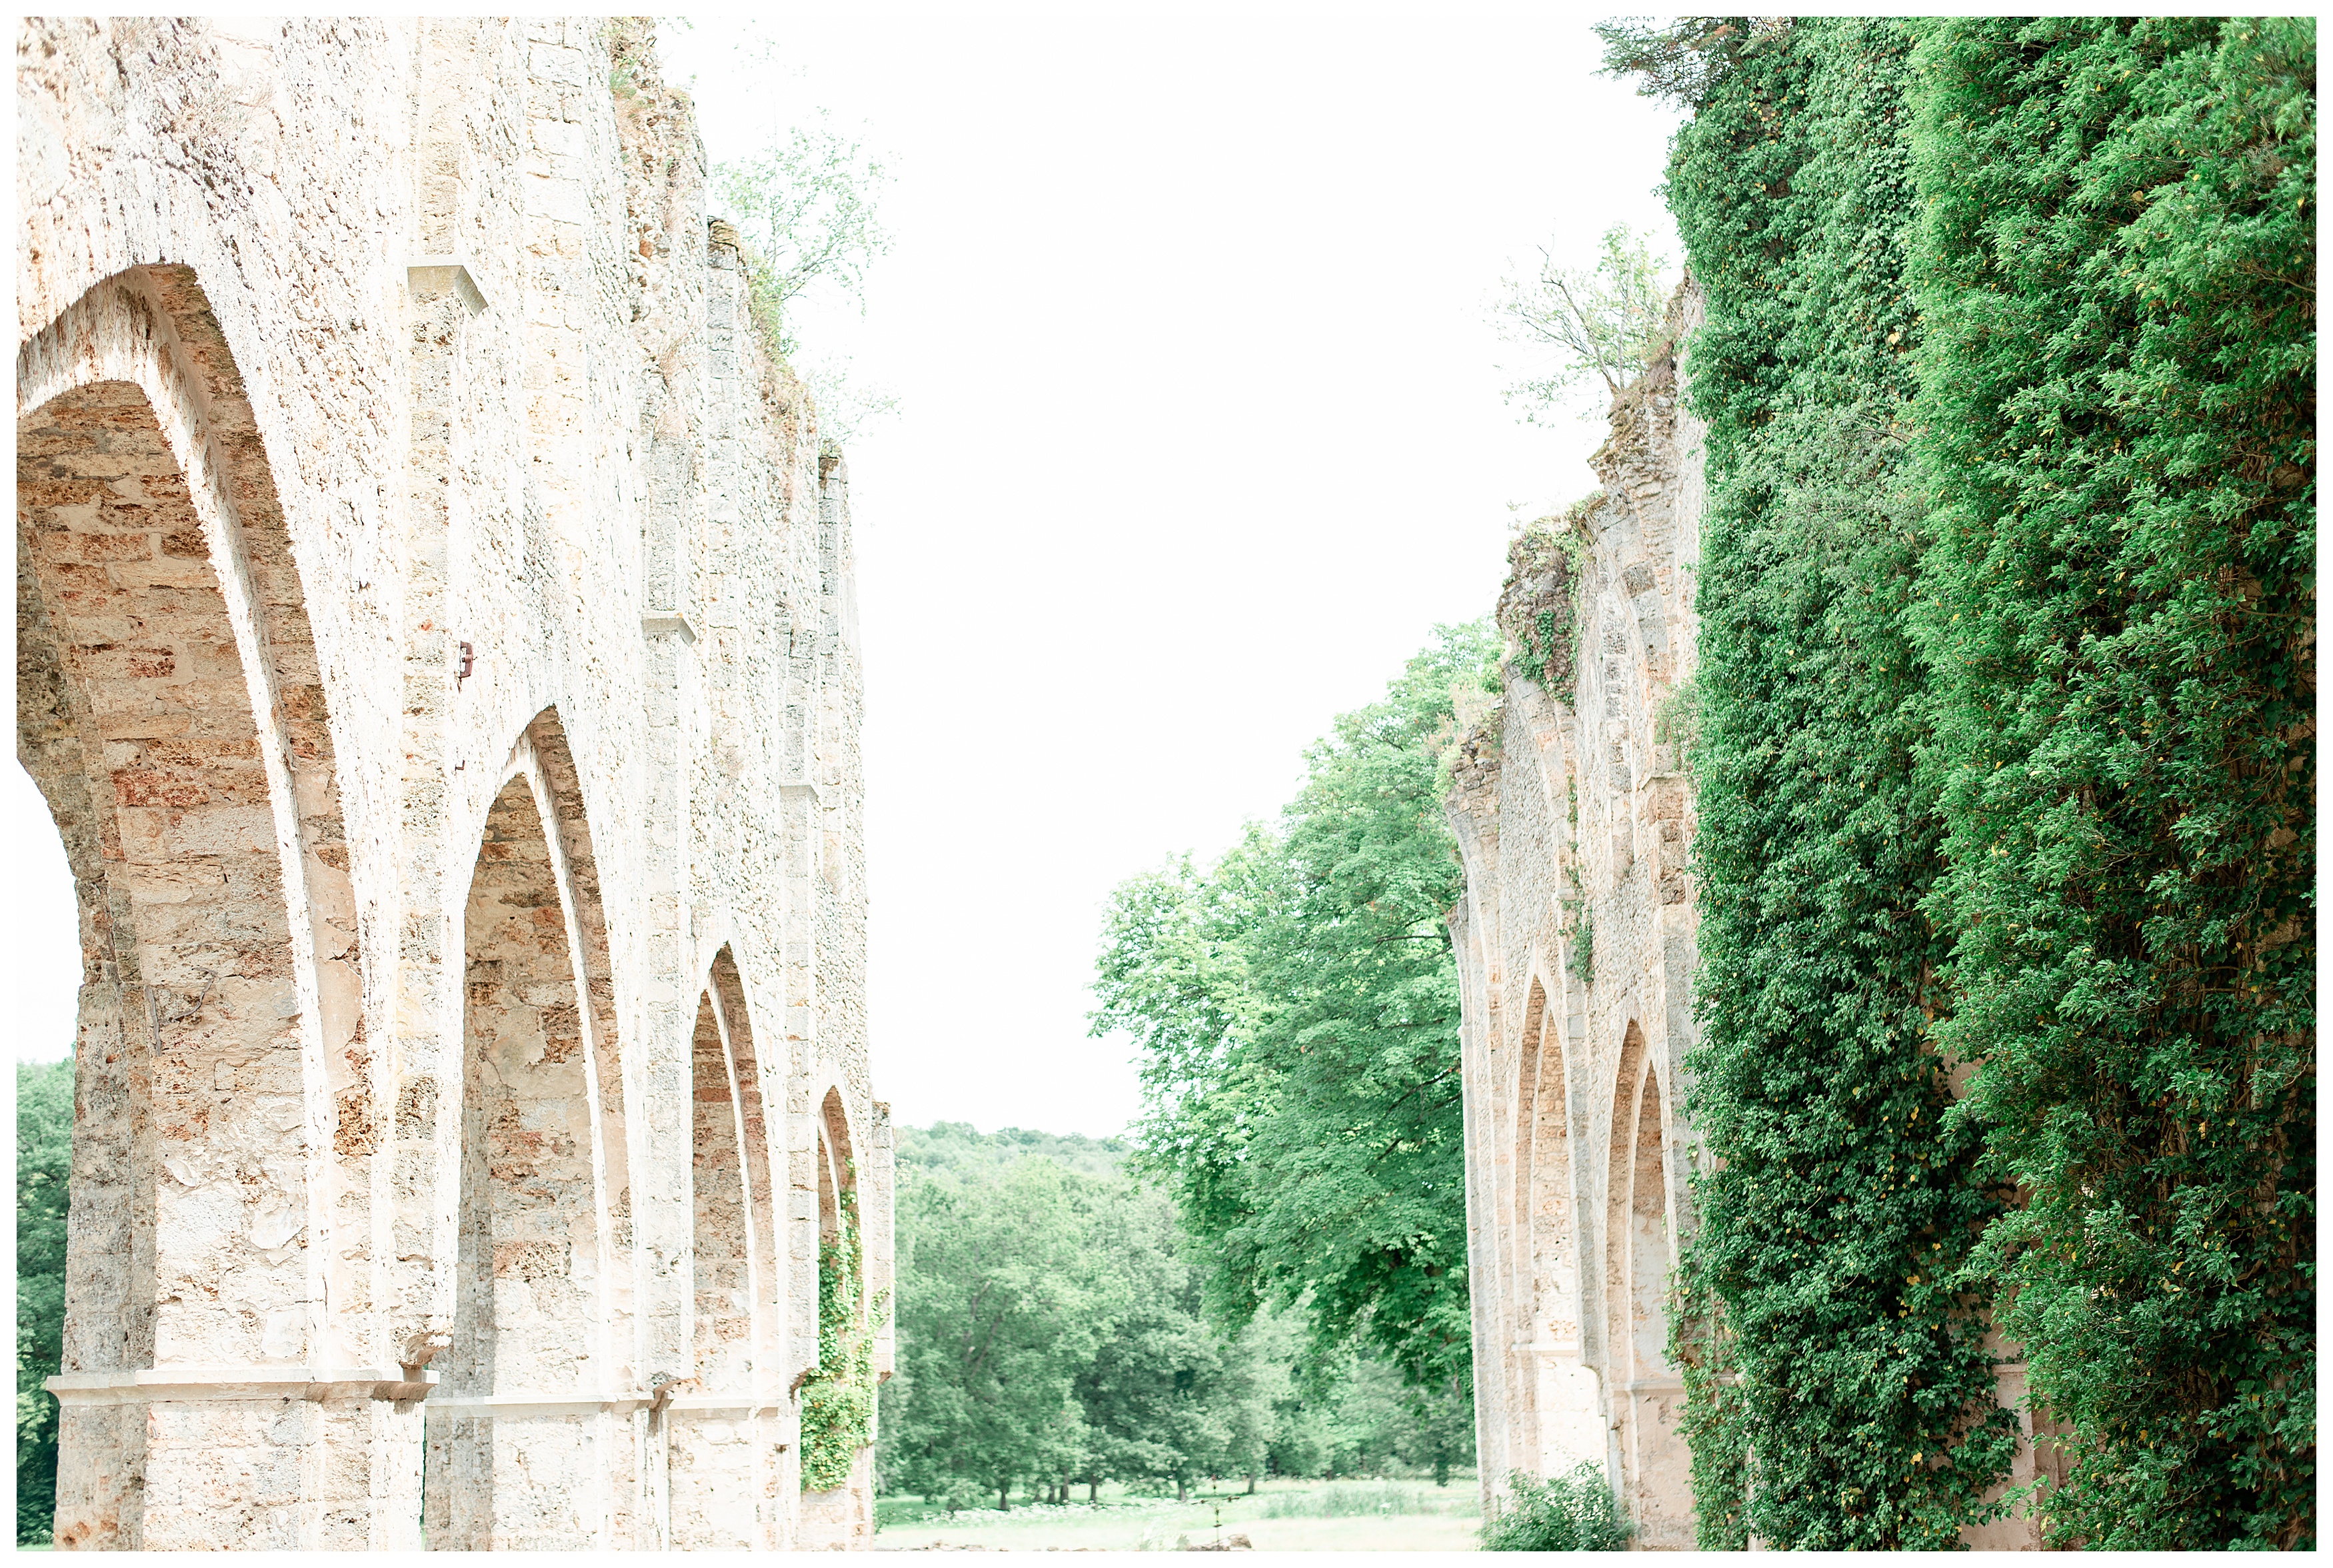 ruins of the cloisters of the abbaye des vaux de cernay in the rambouillet forest just outside paris